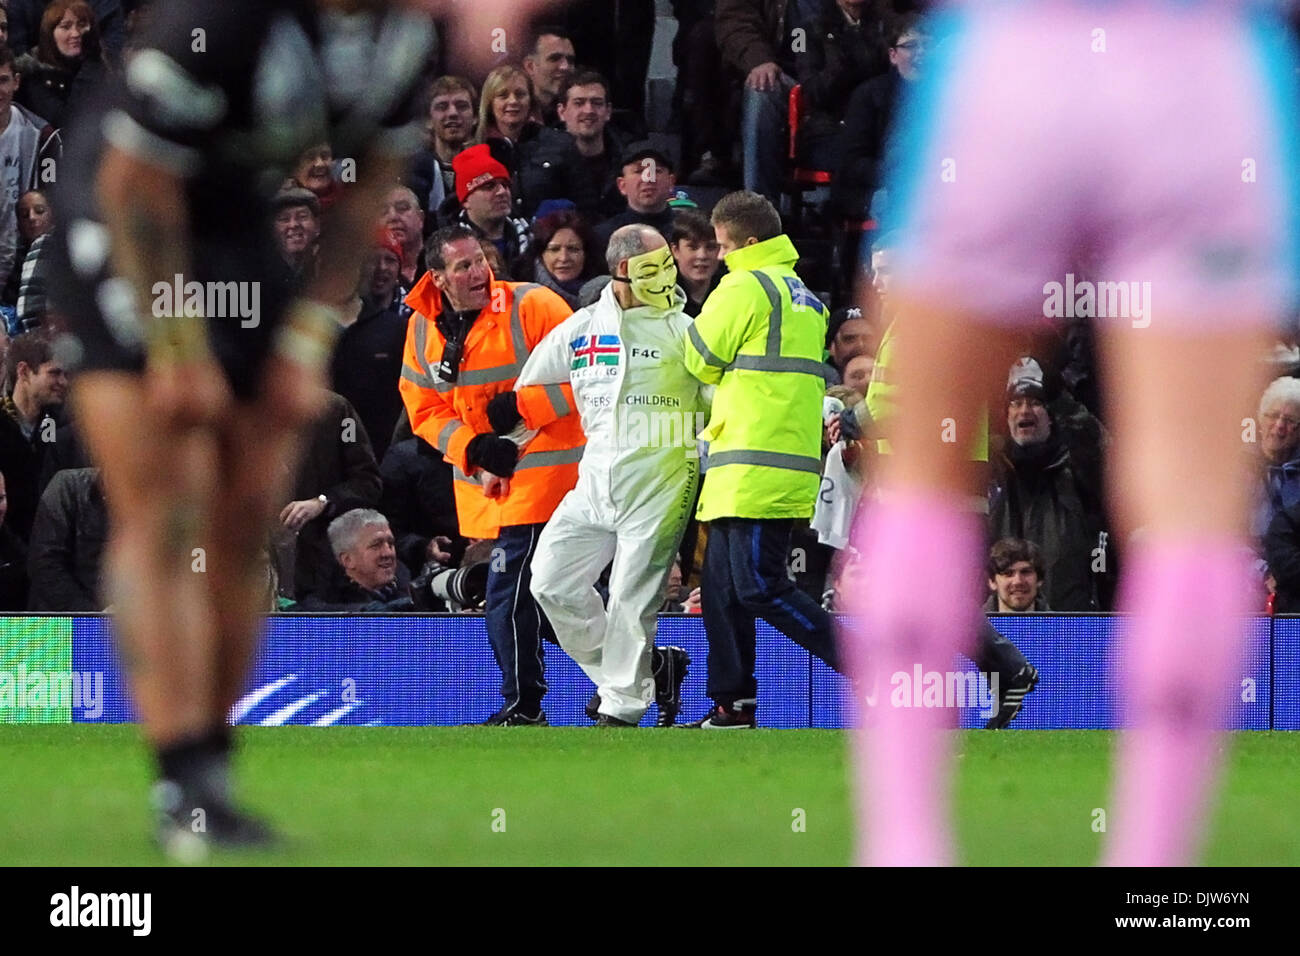 Manchester, UK. 30th Nov, 2013. A Fathers For Action Protestor runs on to the pitch and is escorted from the stadium during the Rugby League World Cup Final between New Zealand and Australia at Old Trafford Manchester. Credit:  Action Plus Sports/Alamy Live News Stock Photo